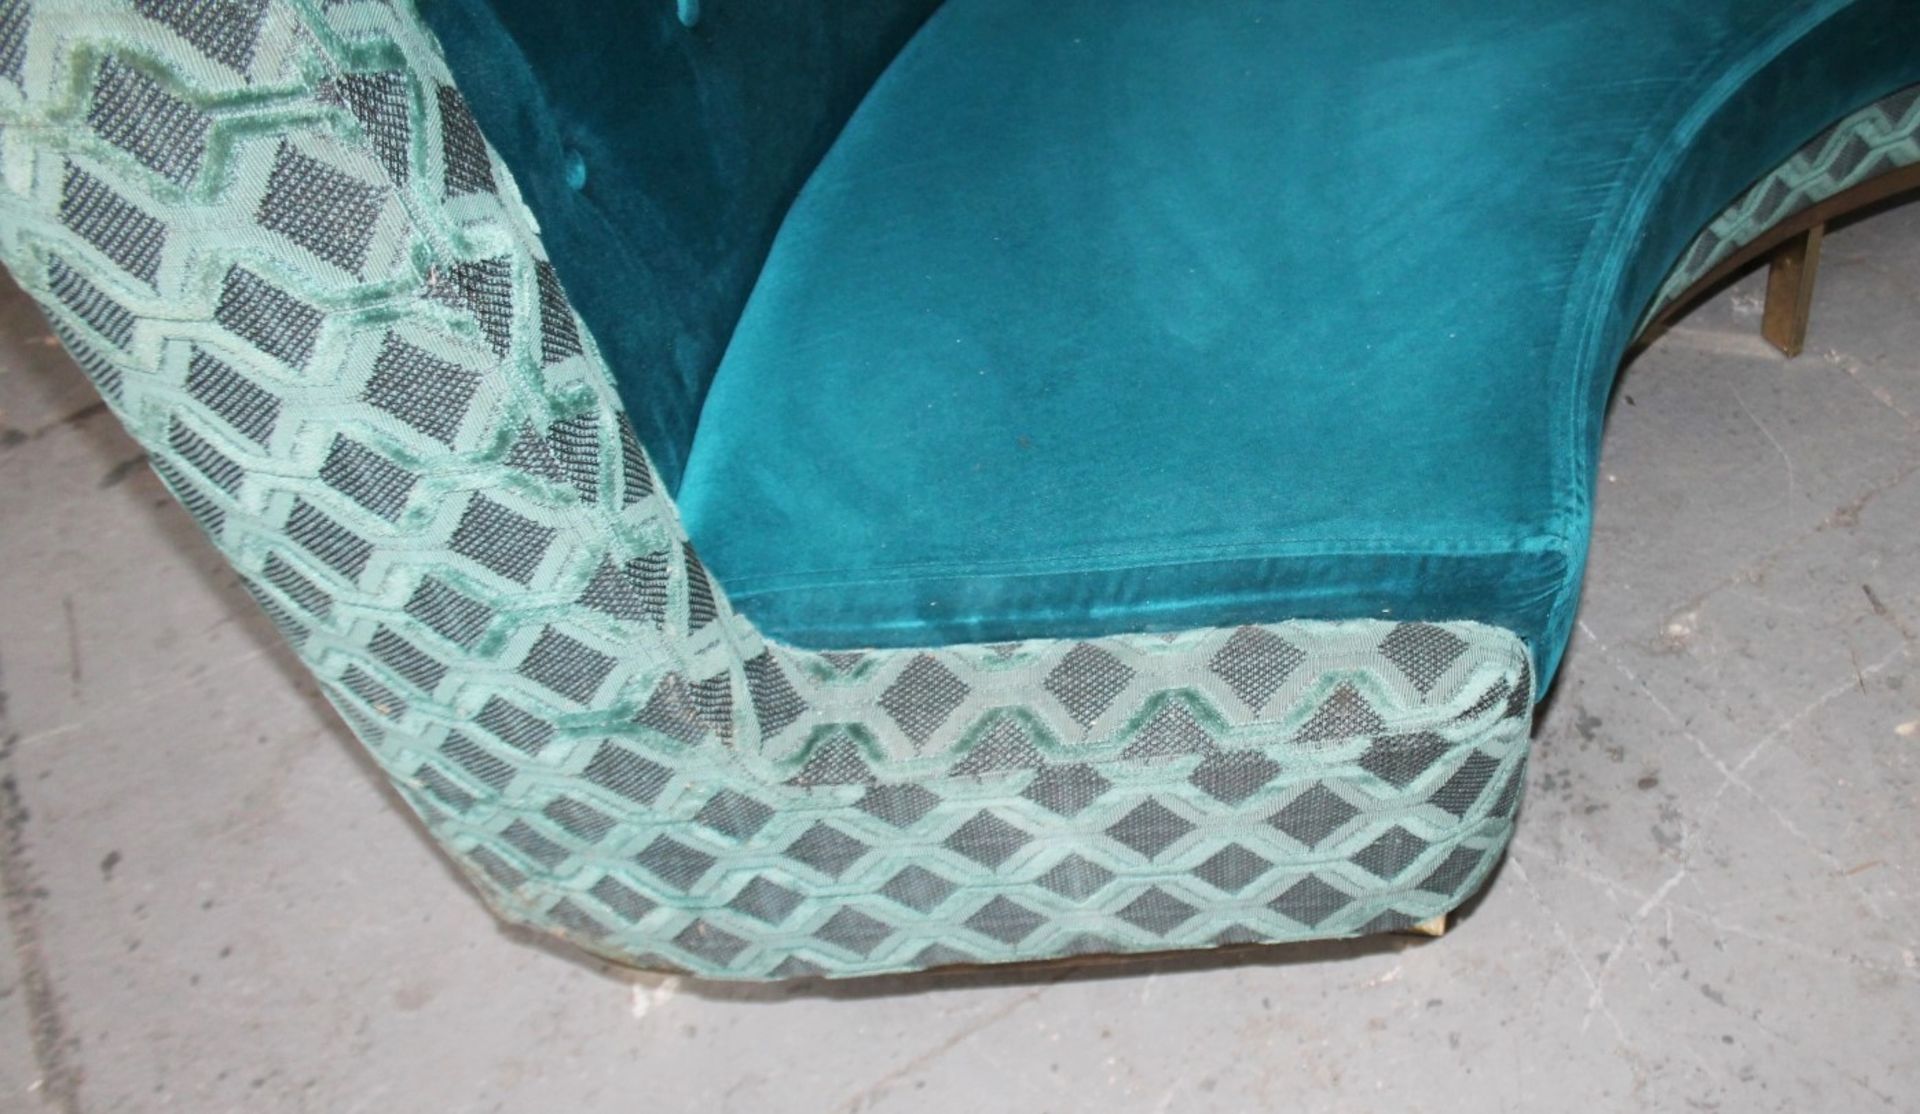 1 x Bespoke Commercial Curved C-Shaped Booth Seating Upholstered In Premium Teal Coloured Fabrics - - Image 12 of 17